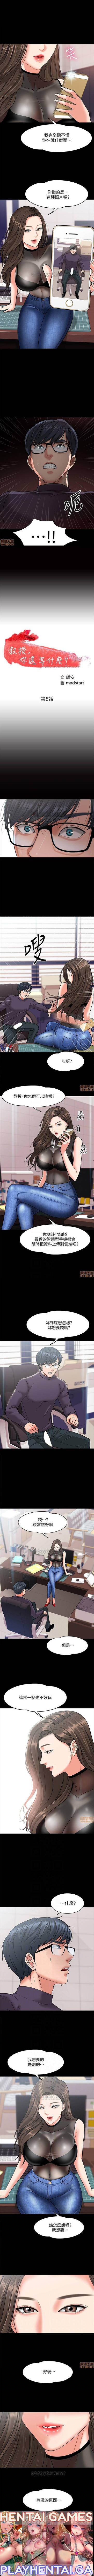 PROFESSOR, ARE YOU JUST GOING TO LOOK AT ME? | DESIRE SWAMP | 教授，你還等什麼? Ch. 5 [Chinese] Manhwa 1